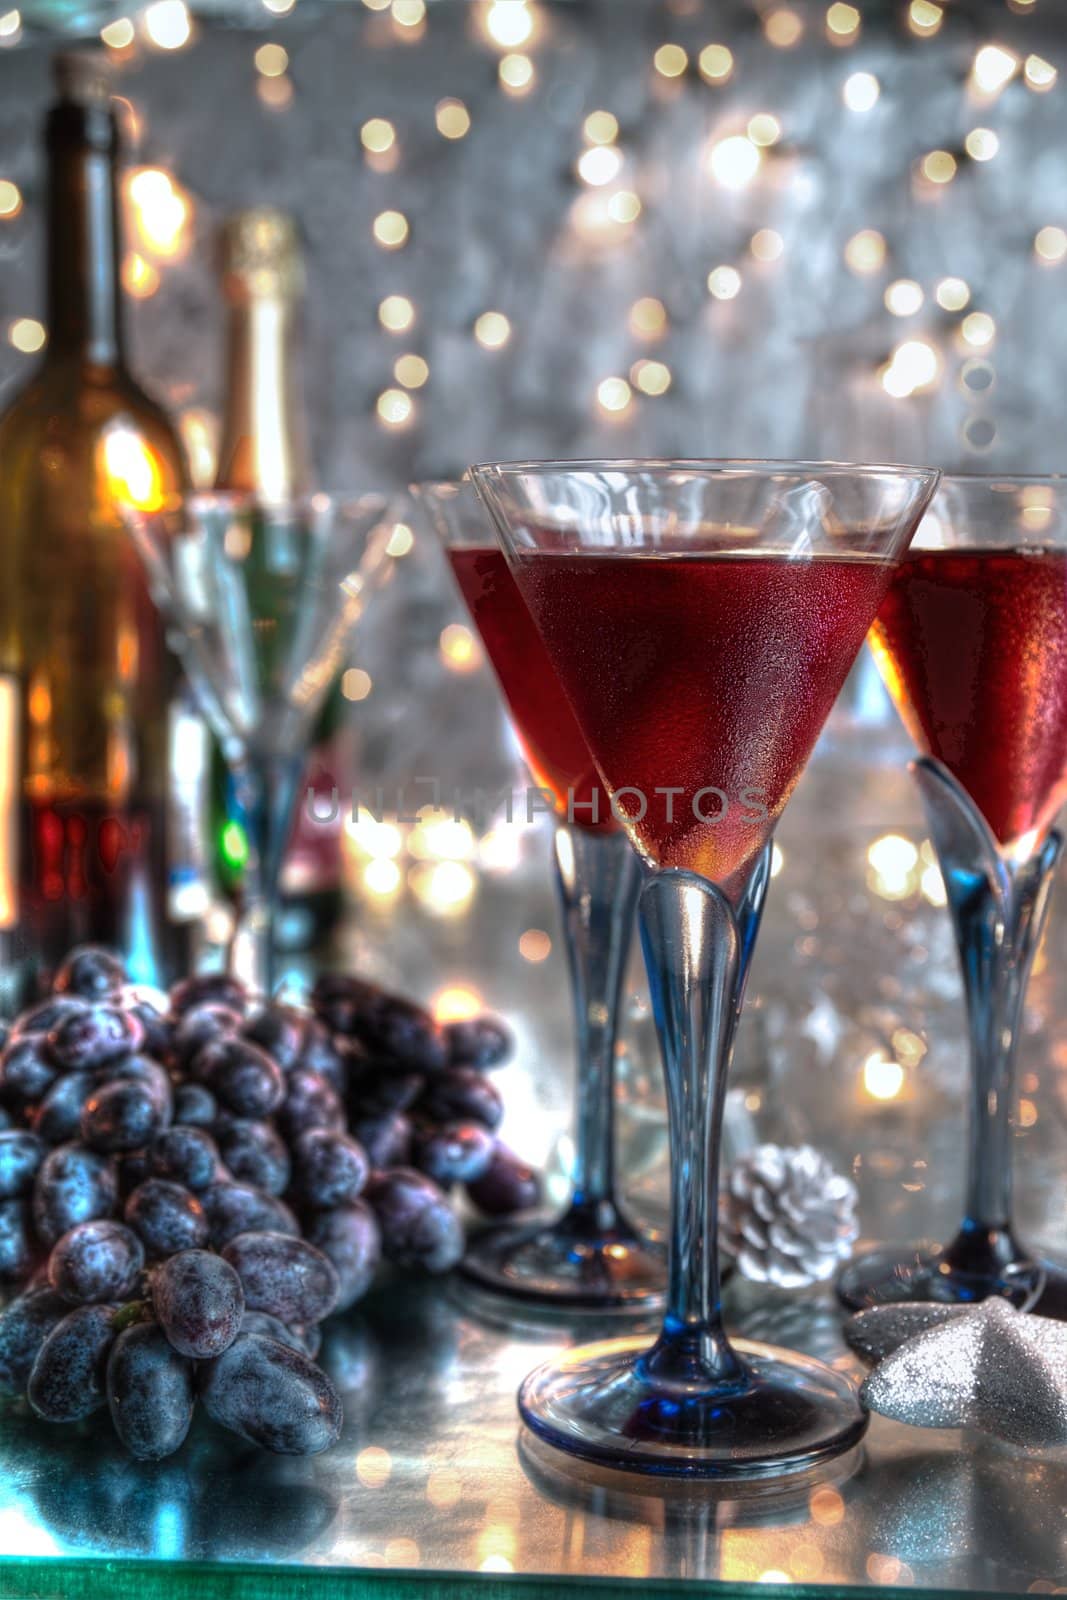 Red wine in glasses,bottles,grapes and blurred lights on silver background.